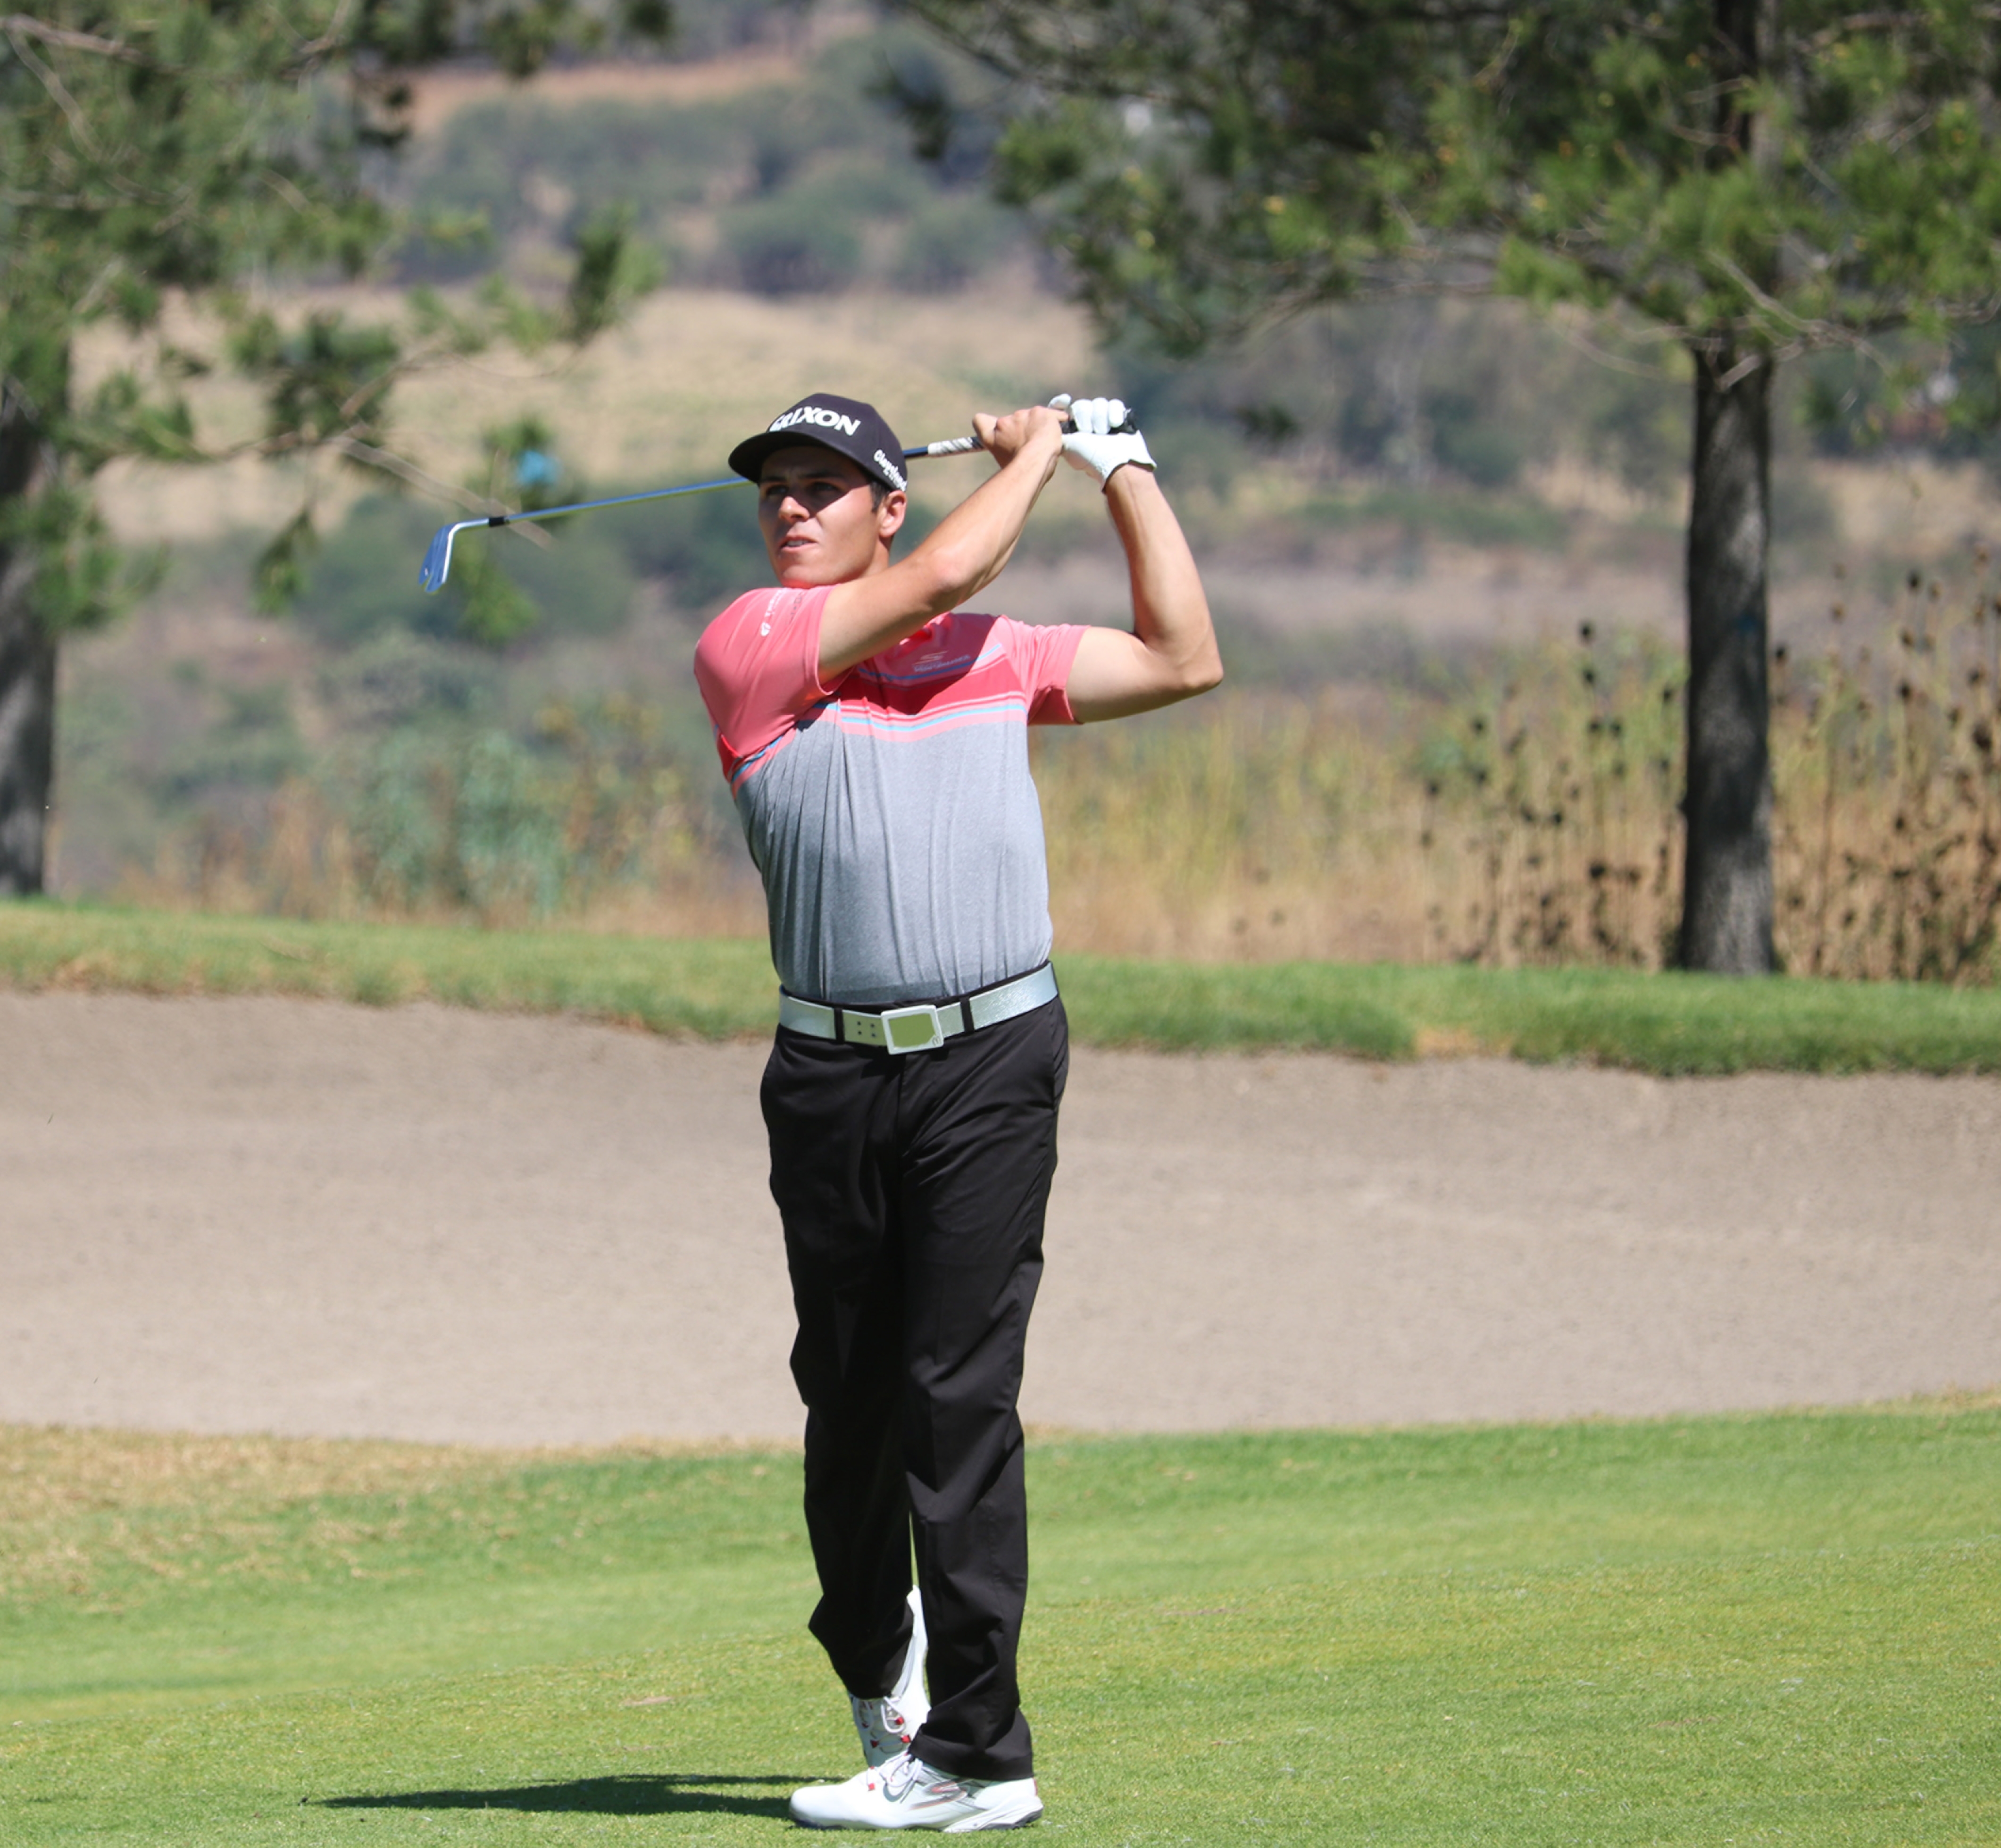 Skechers Performance™ GO GOLF® Athlete, Matt Atkins, Wins His Web.com Victory at the El Bosque Mexico Championship | Business Wire